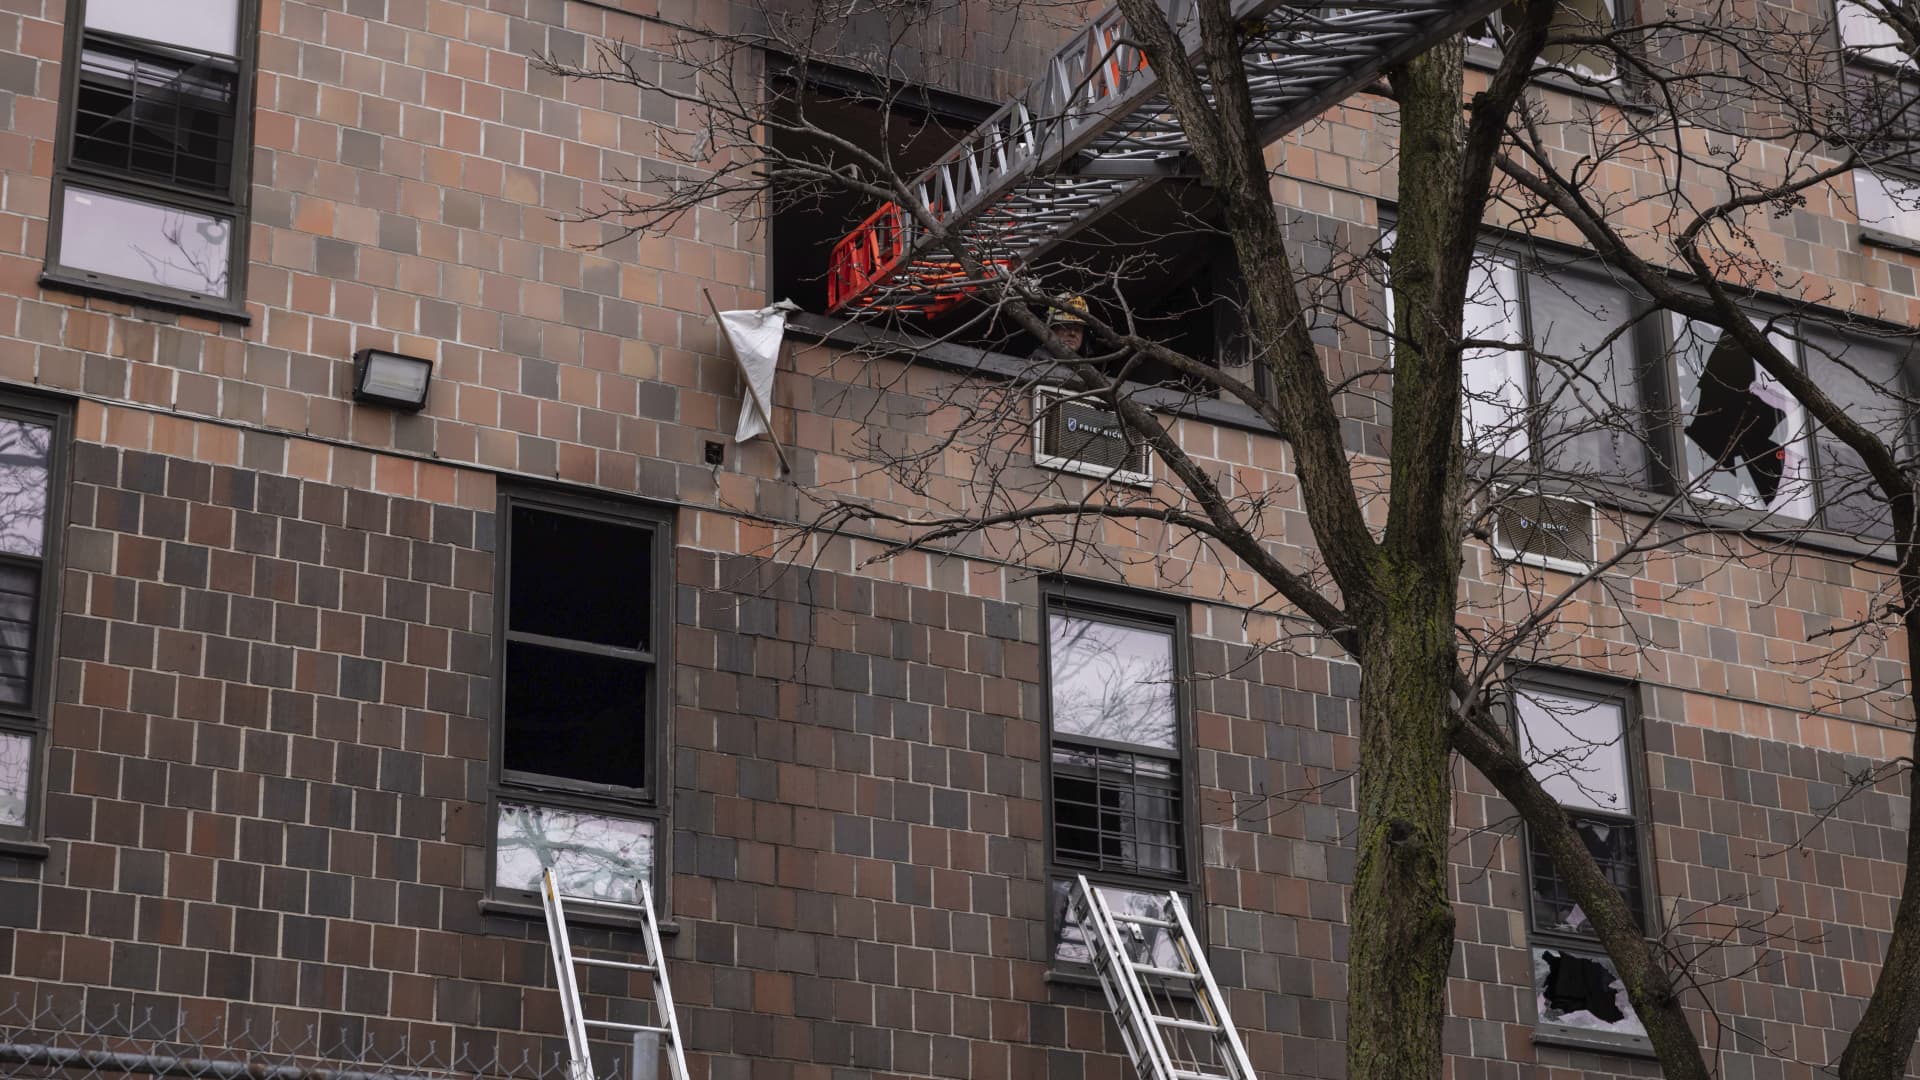 Ladders are seen erected beside the apartment building in the Bronx after a fire occurred on Sunday, Jan. 9, 2022, in New York.